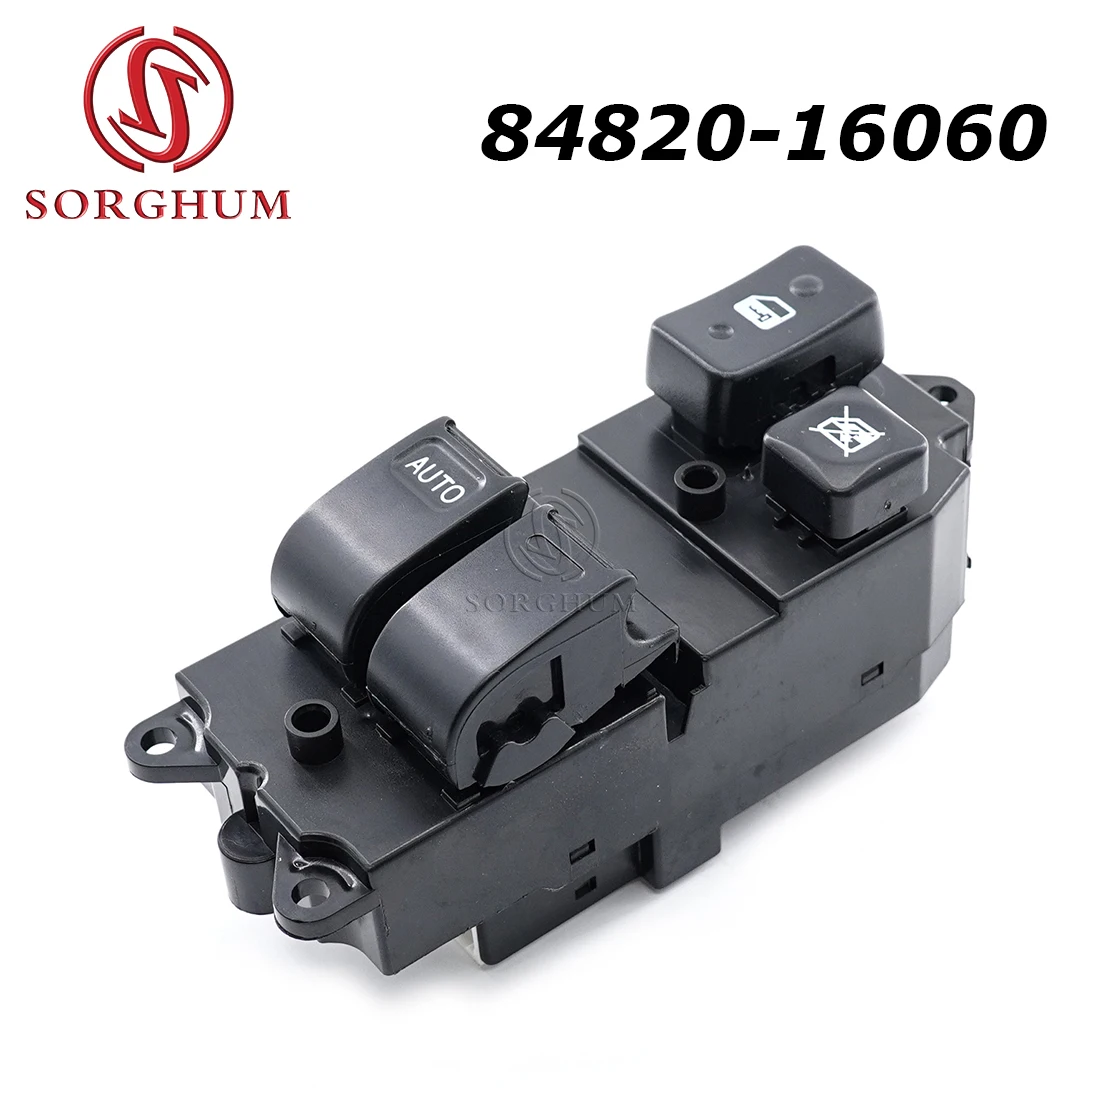 

sorghum New 84820-16060 Electric Master Power Control Window Switch For Toyota Paseo Tercel Mr2 Pickup 1989 1995 84820-10070